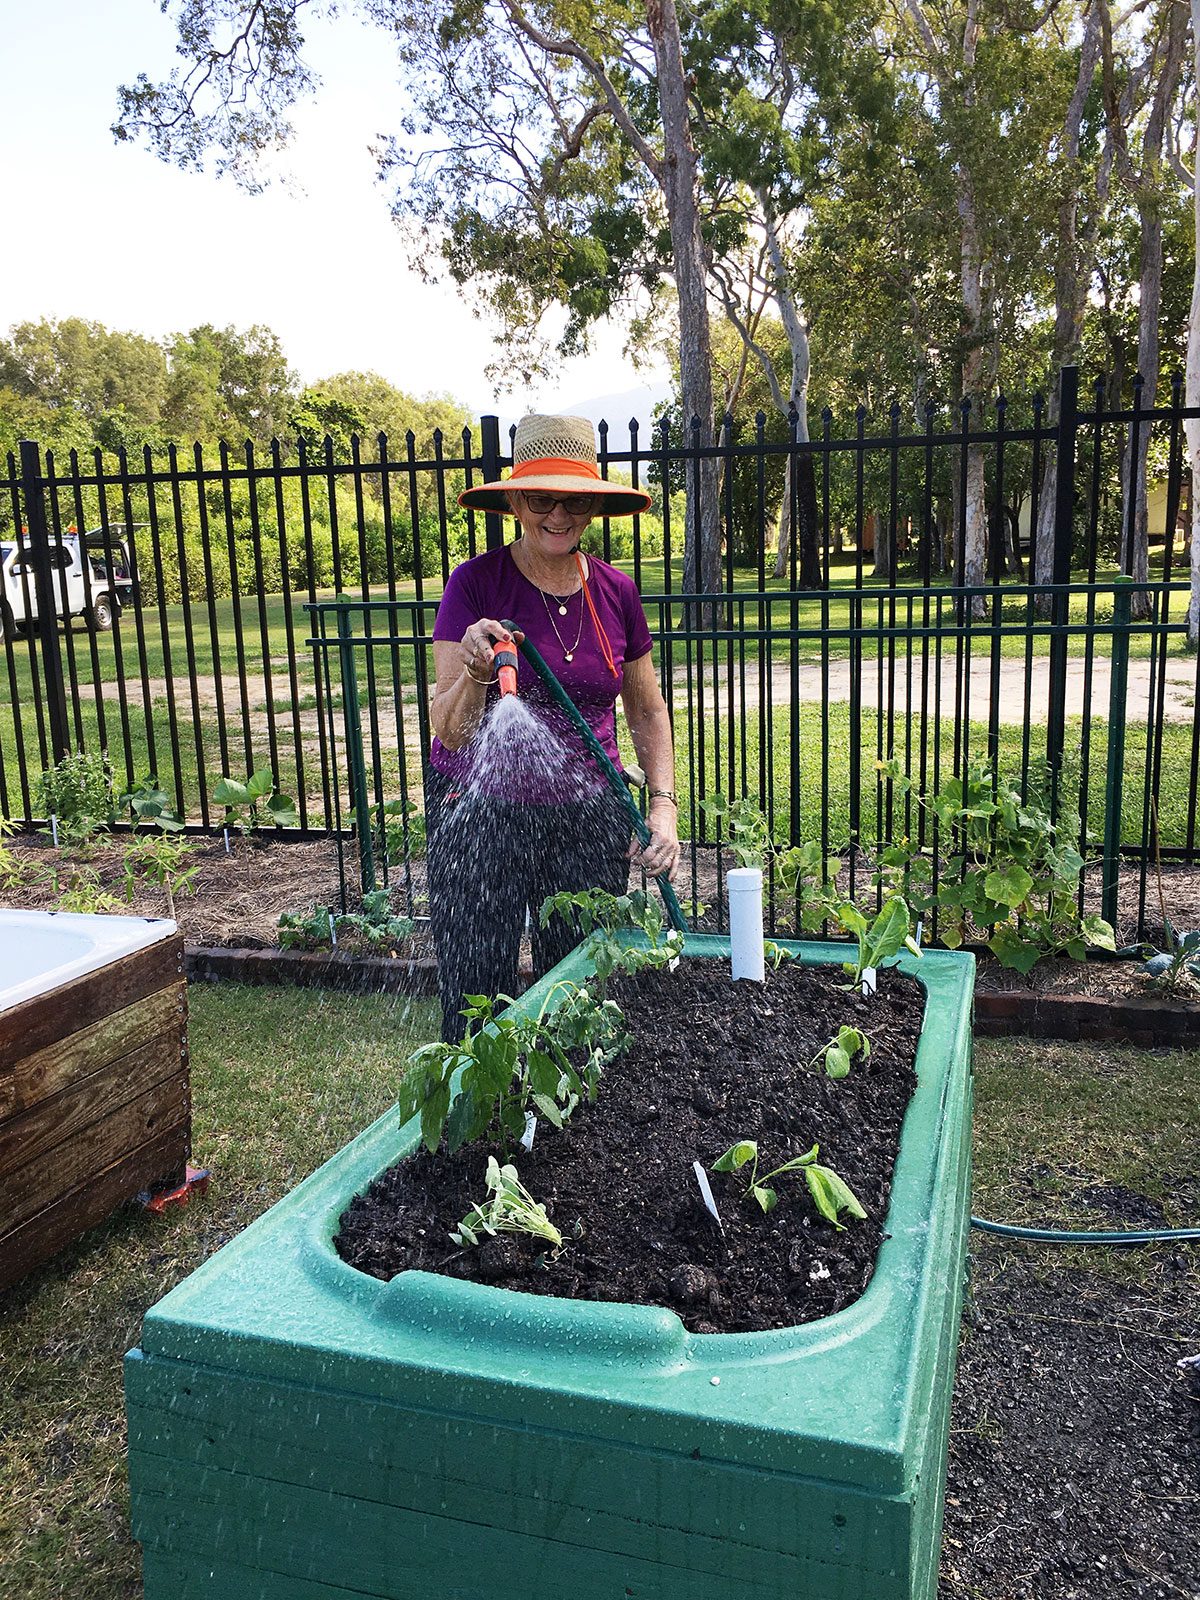 Volunteer watering newly planted vegetables in a wicking bed made from an old bathtub